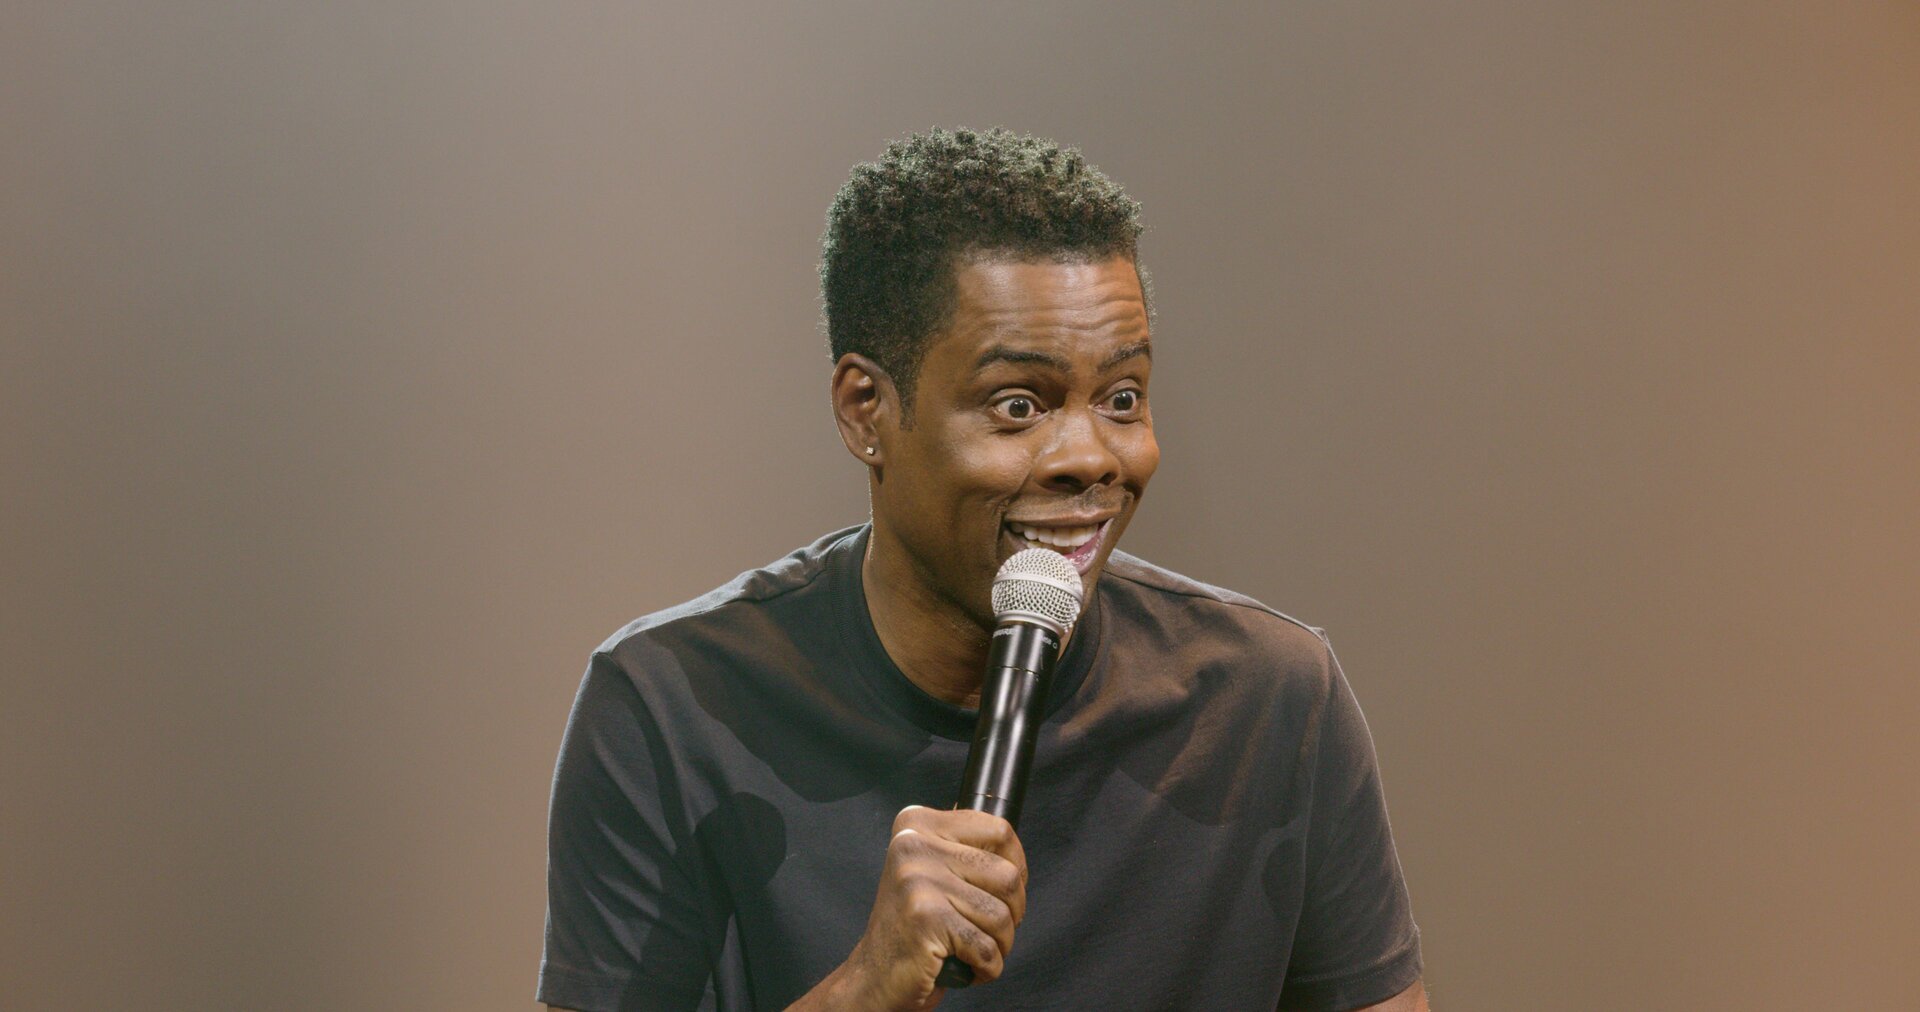 Netflix should put SNL out of its misery by following the Chris Rock special with more live comedy